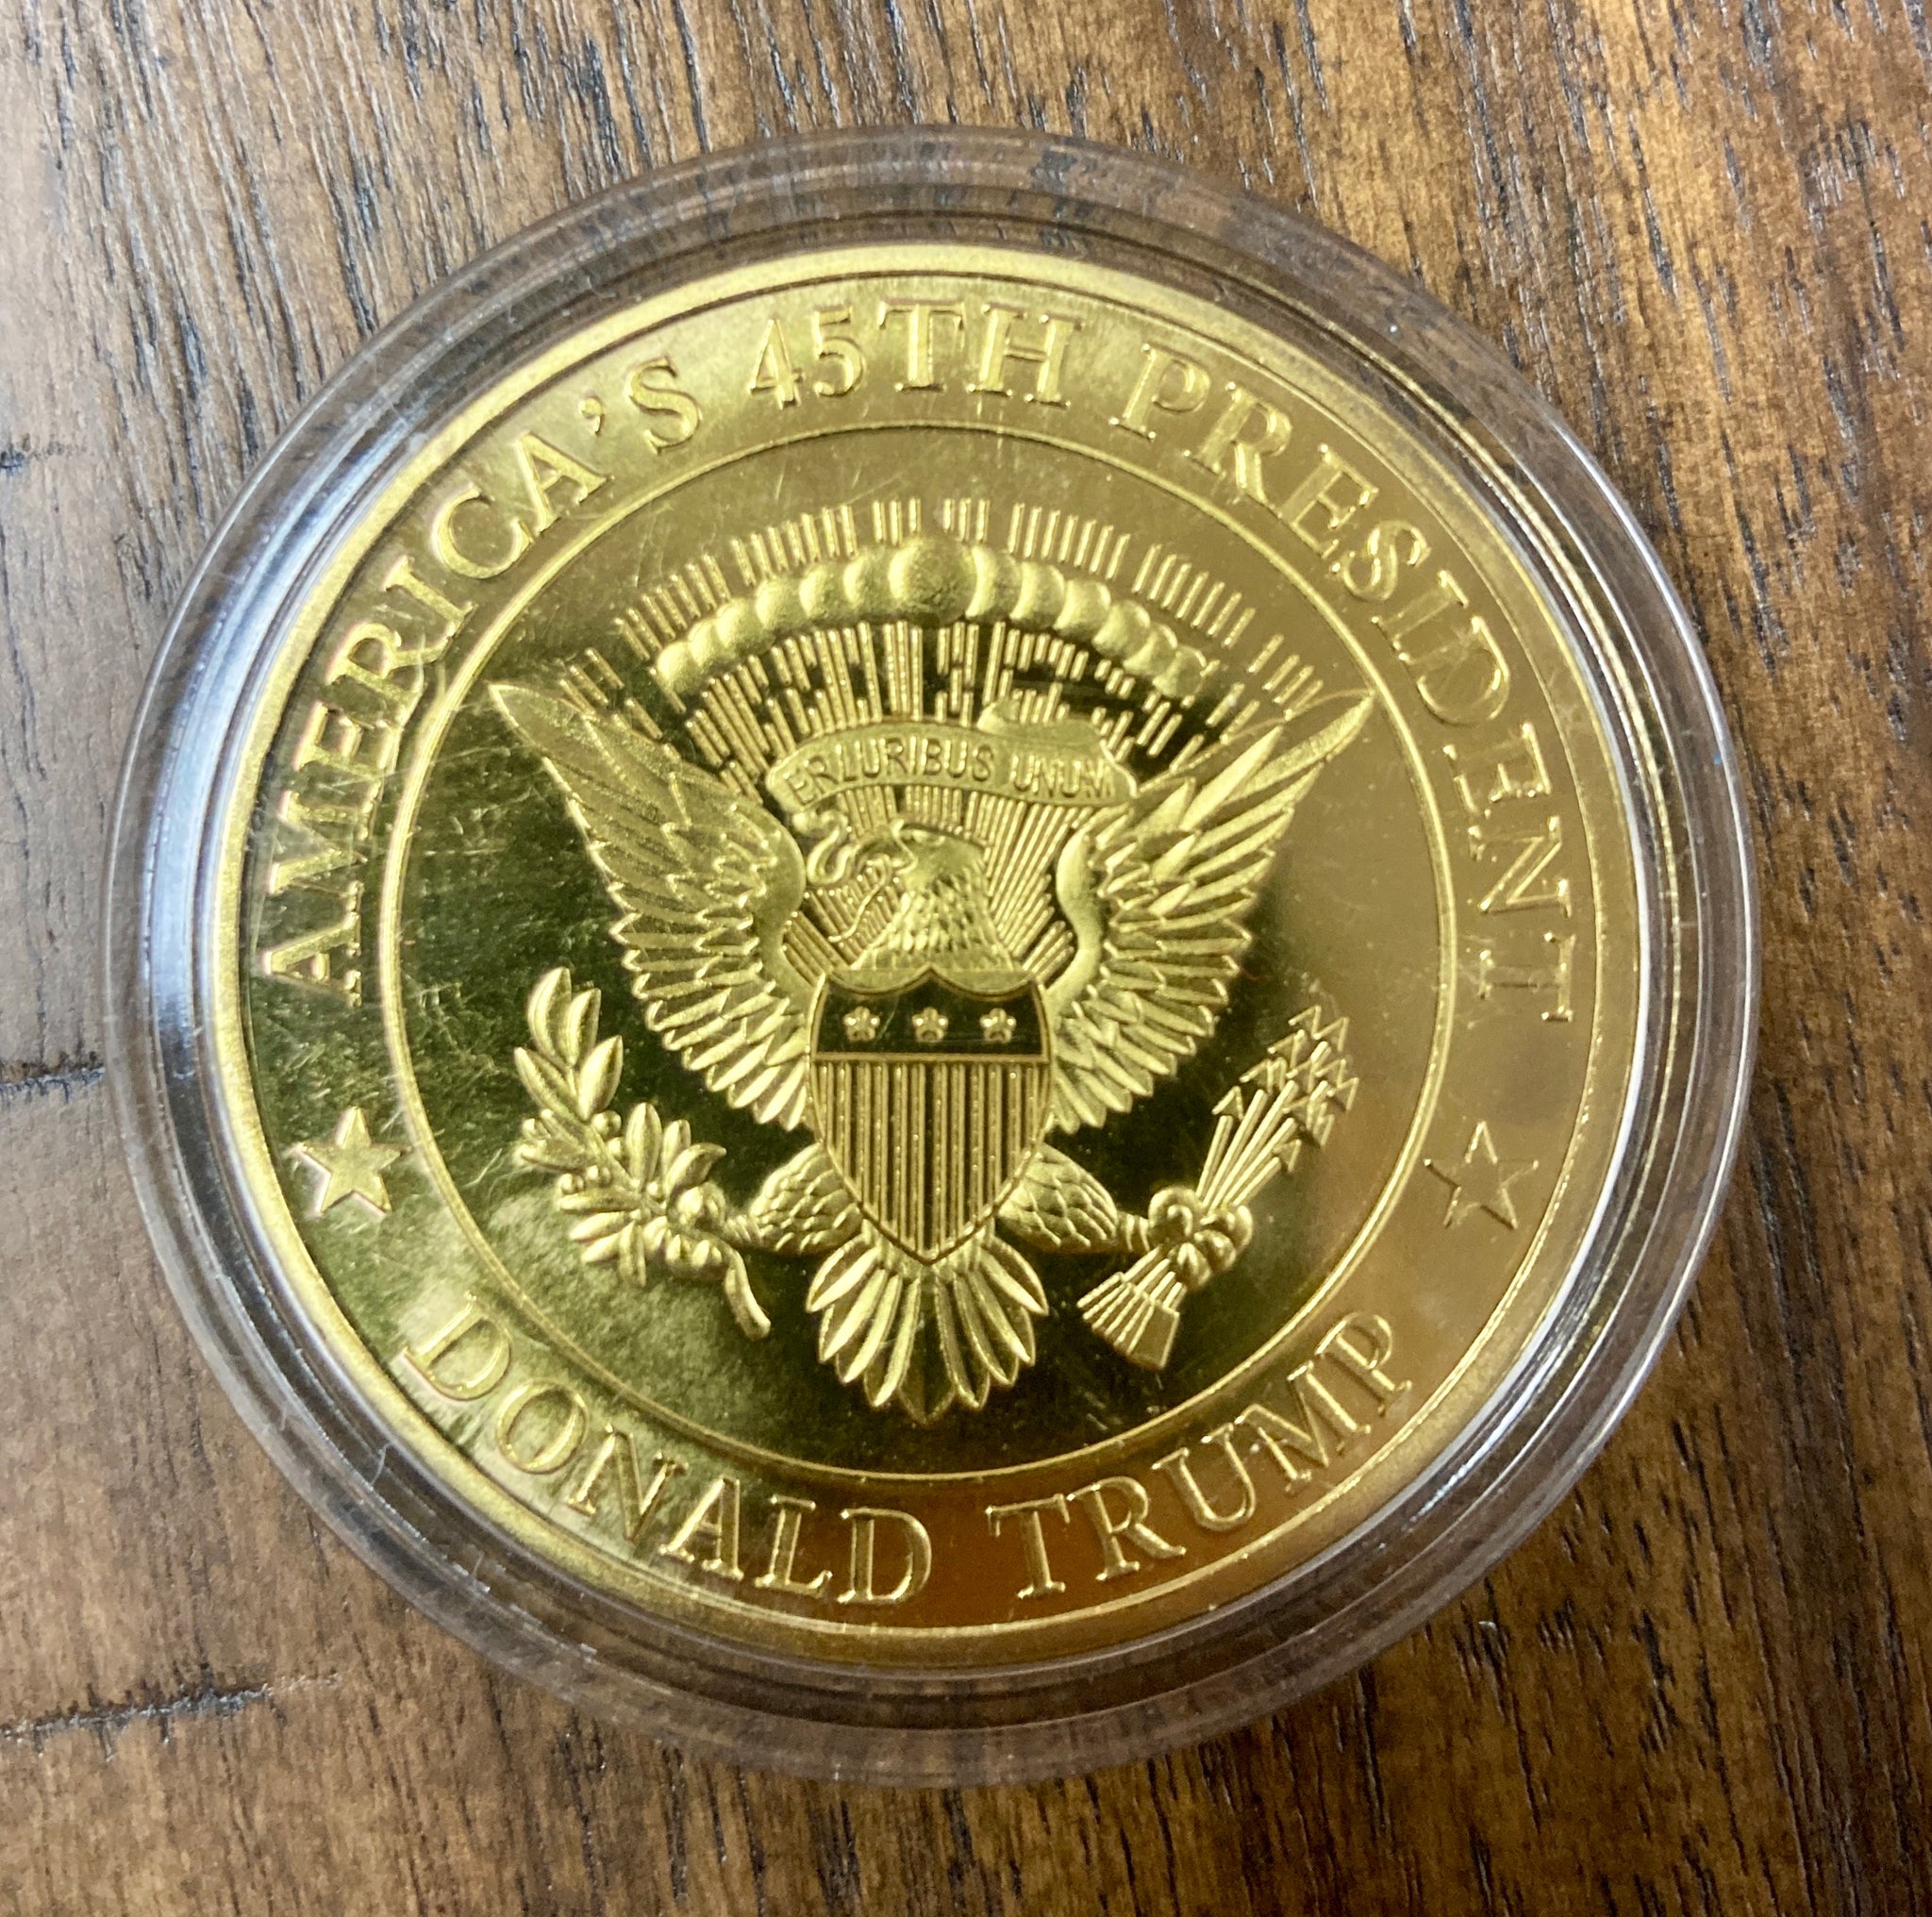 Save America Again Collectible Coin